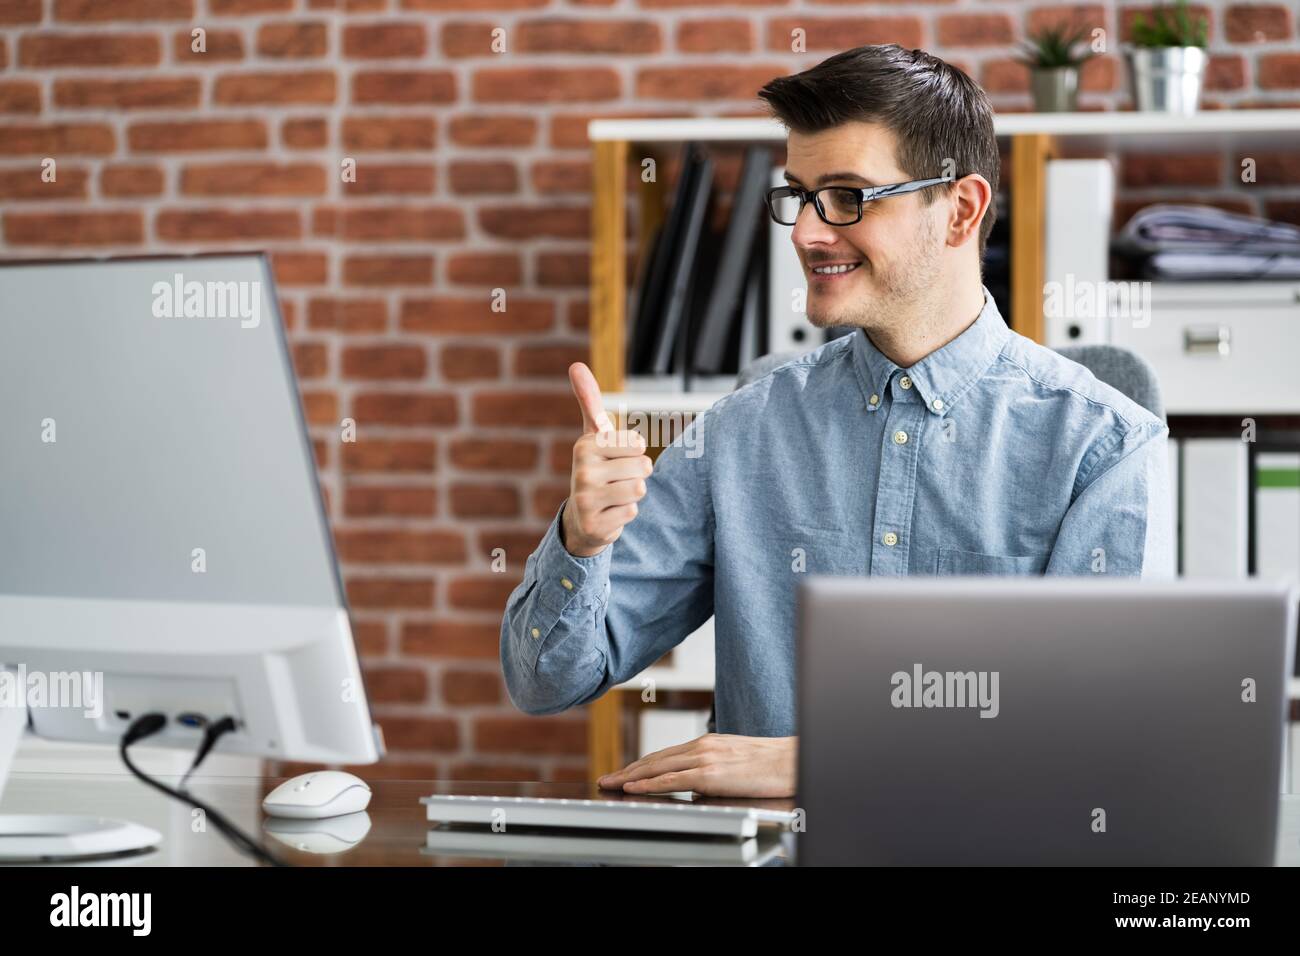 Happy Man Showing Thumbs Up In Video Conference Webinar Stock Photo